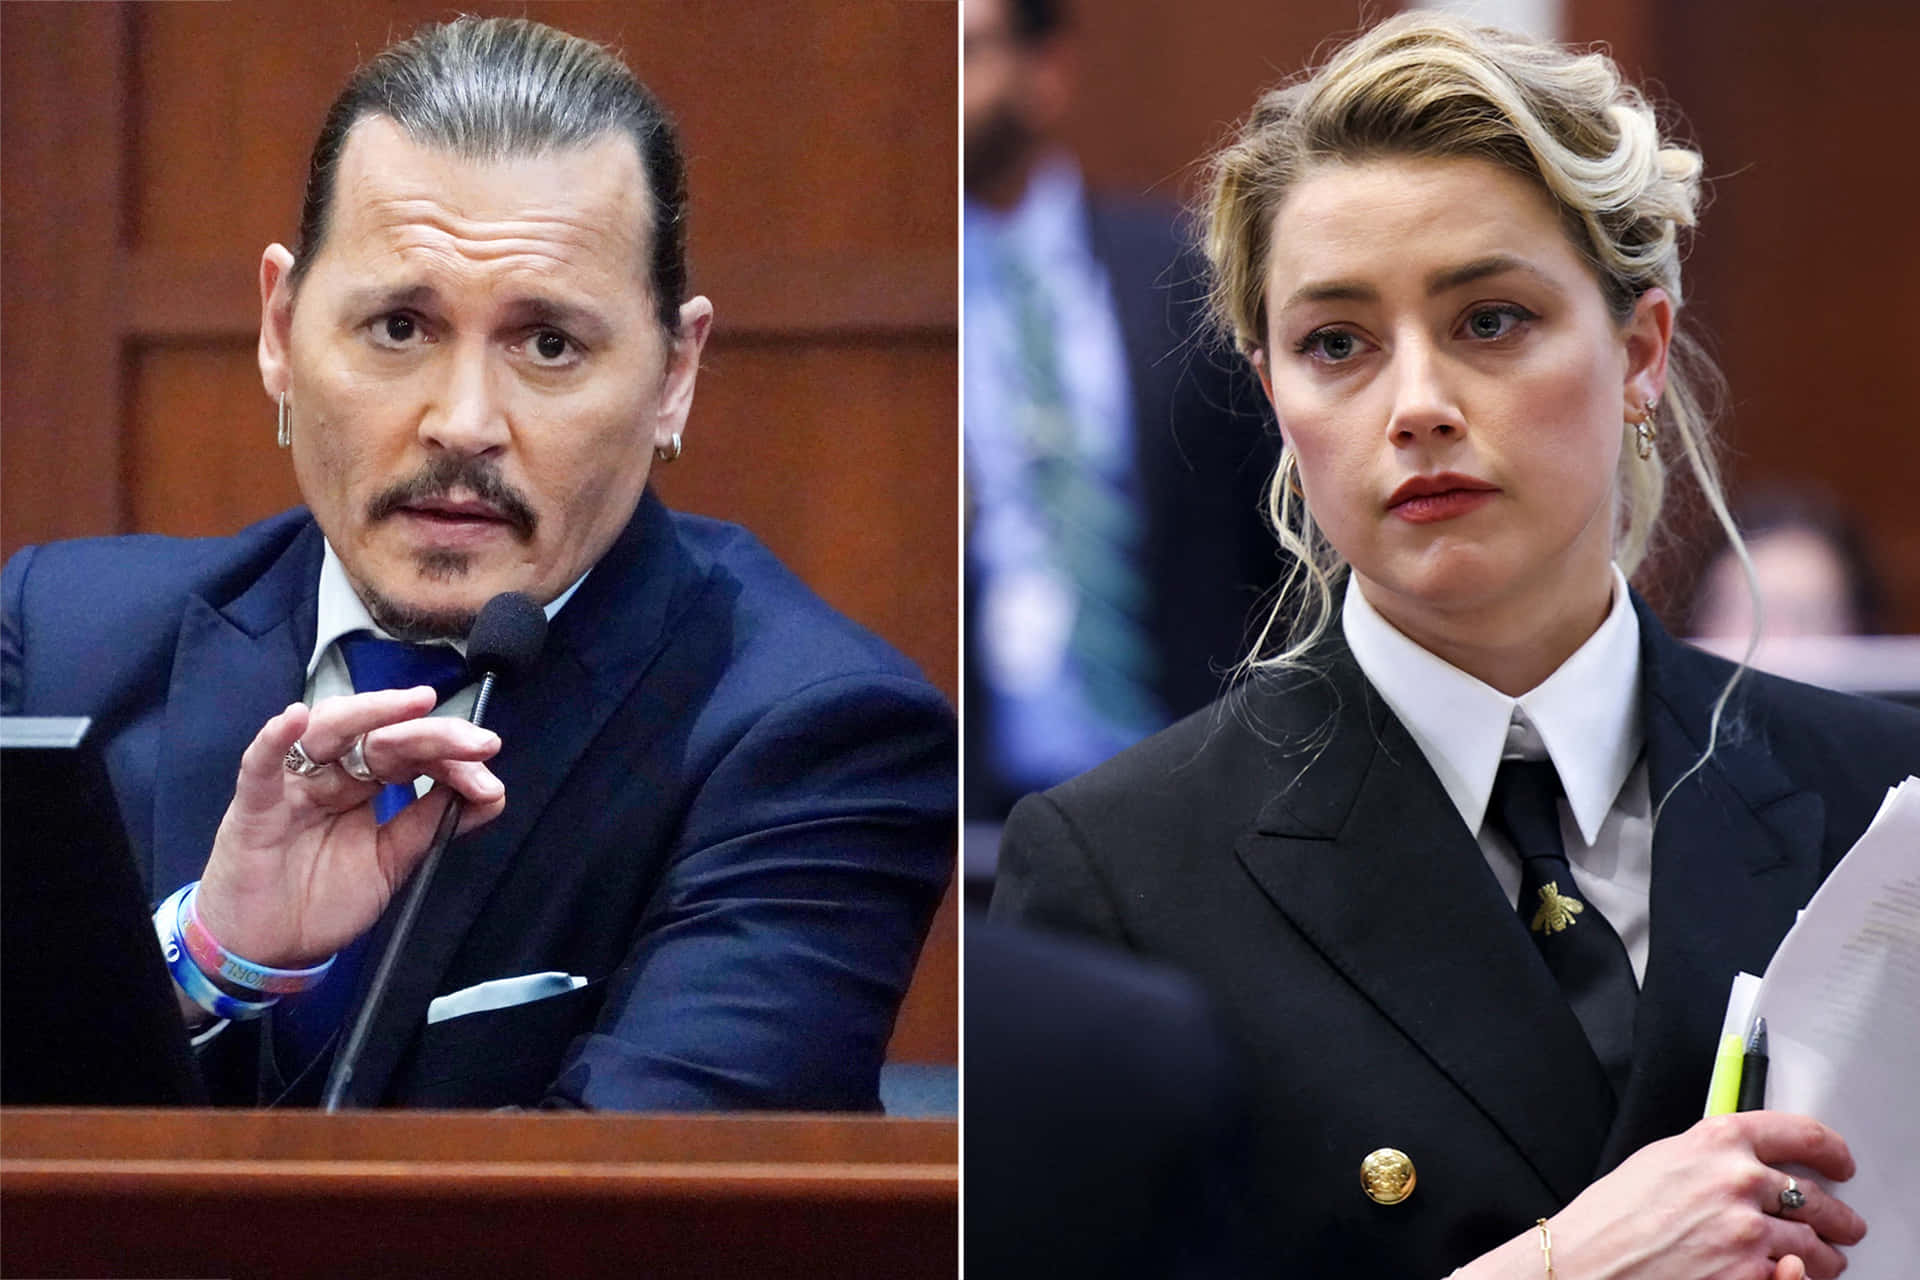 Johnny Depp and Amber Heard - The Perfect Match